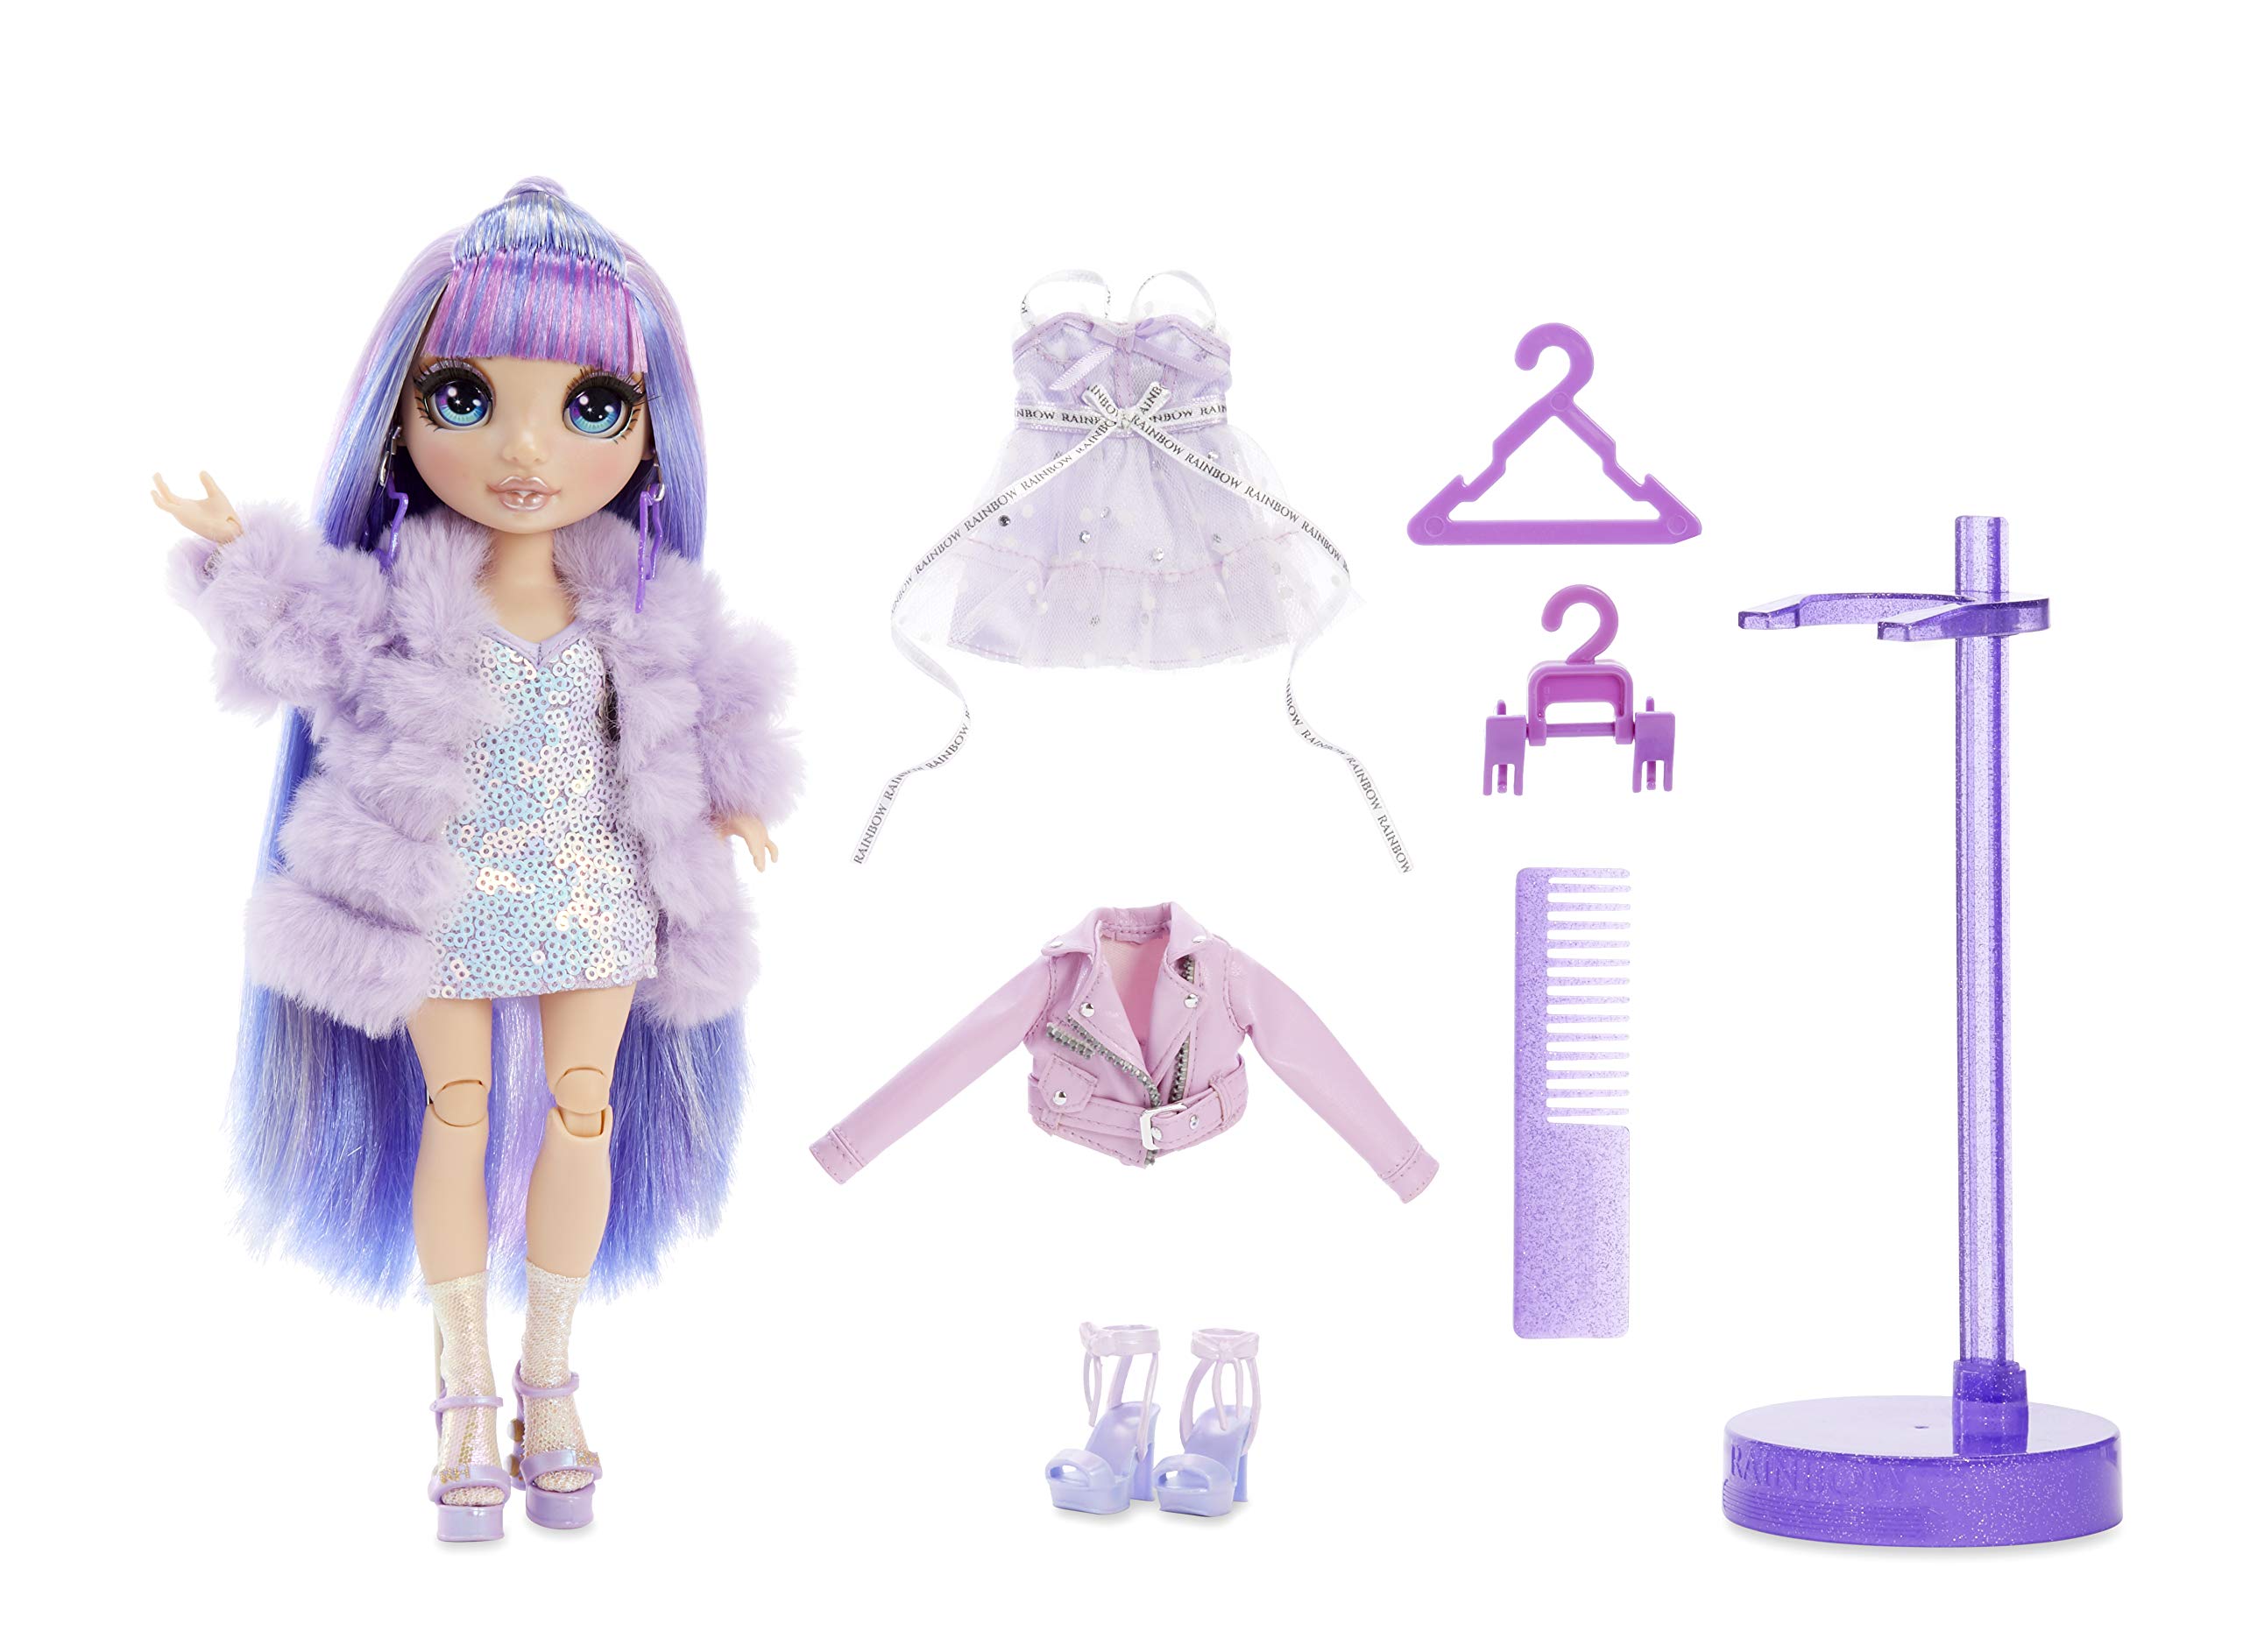 Rainbow High Violet Willow - Purple Clothes Fashion Doll with 2 Complete Mix & Match Outfits and Accessories, Toys for Kids 6 to 12 Years Old, Multicolor.